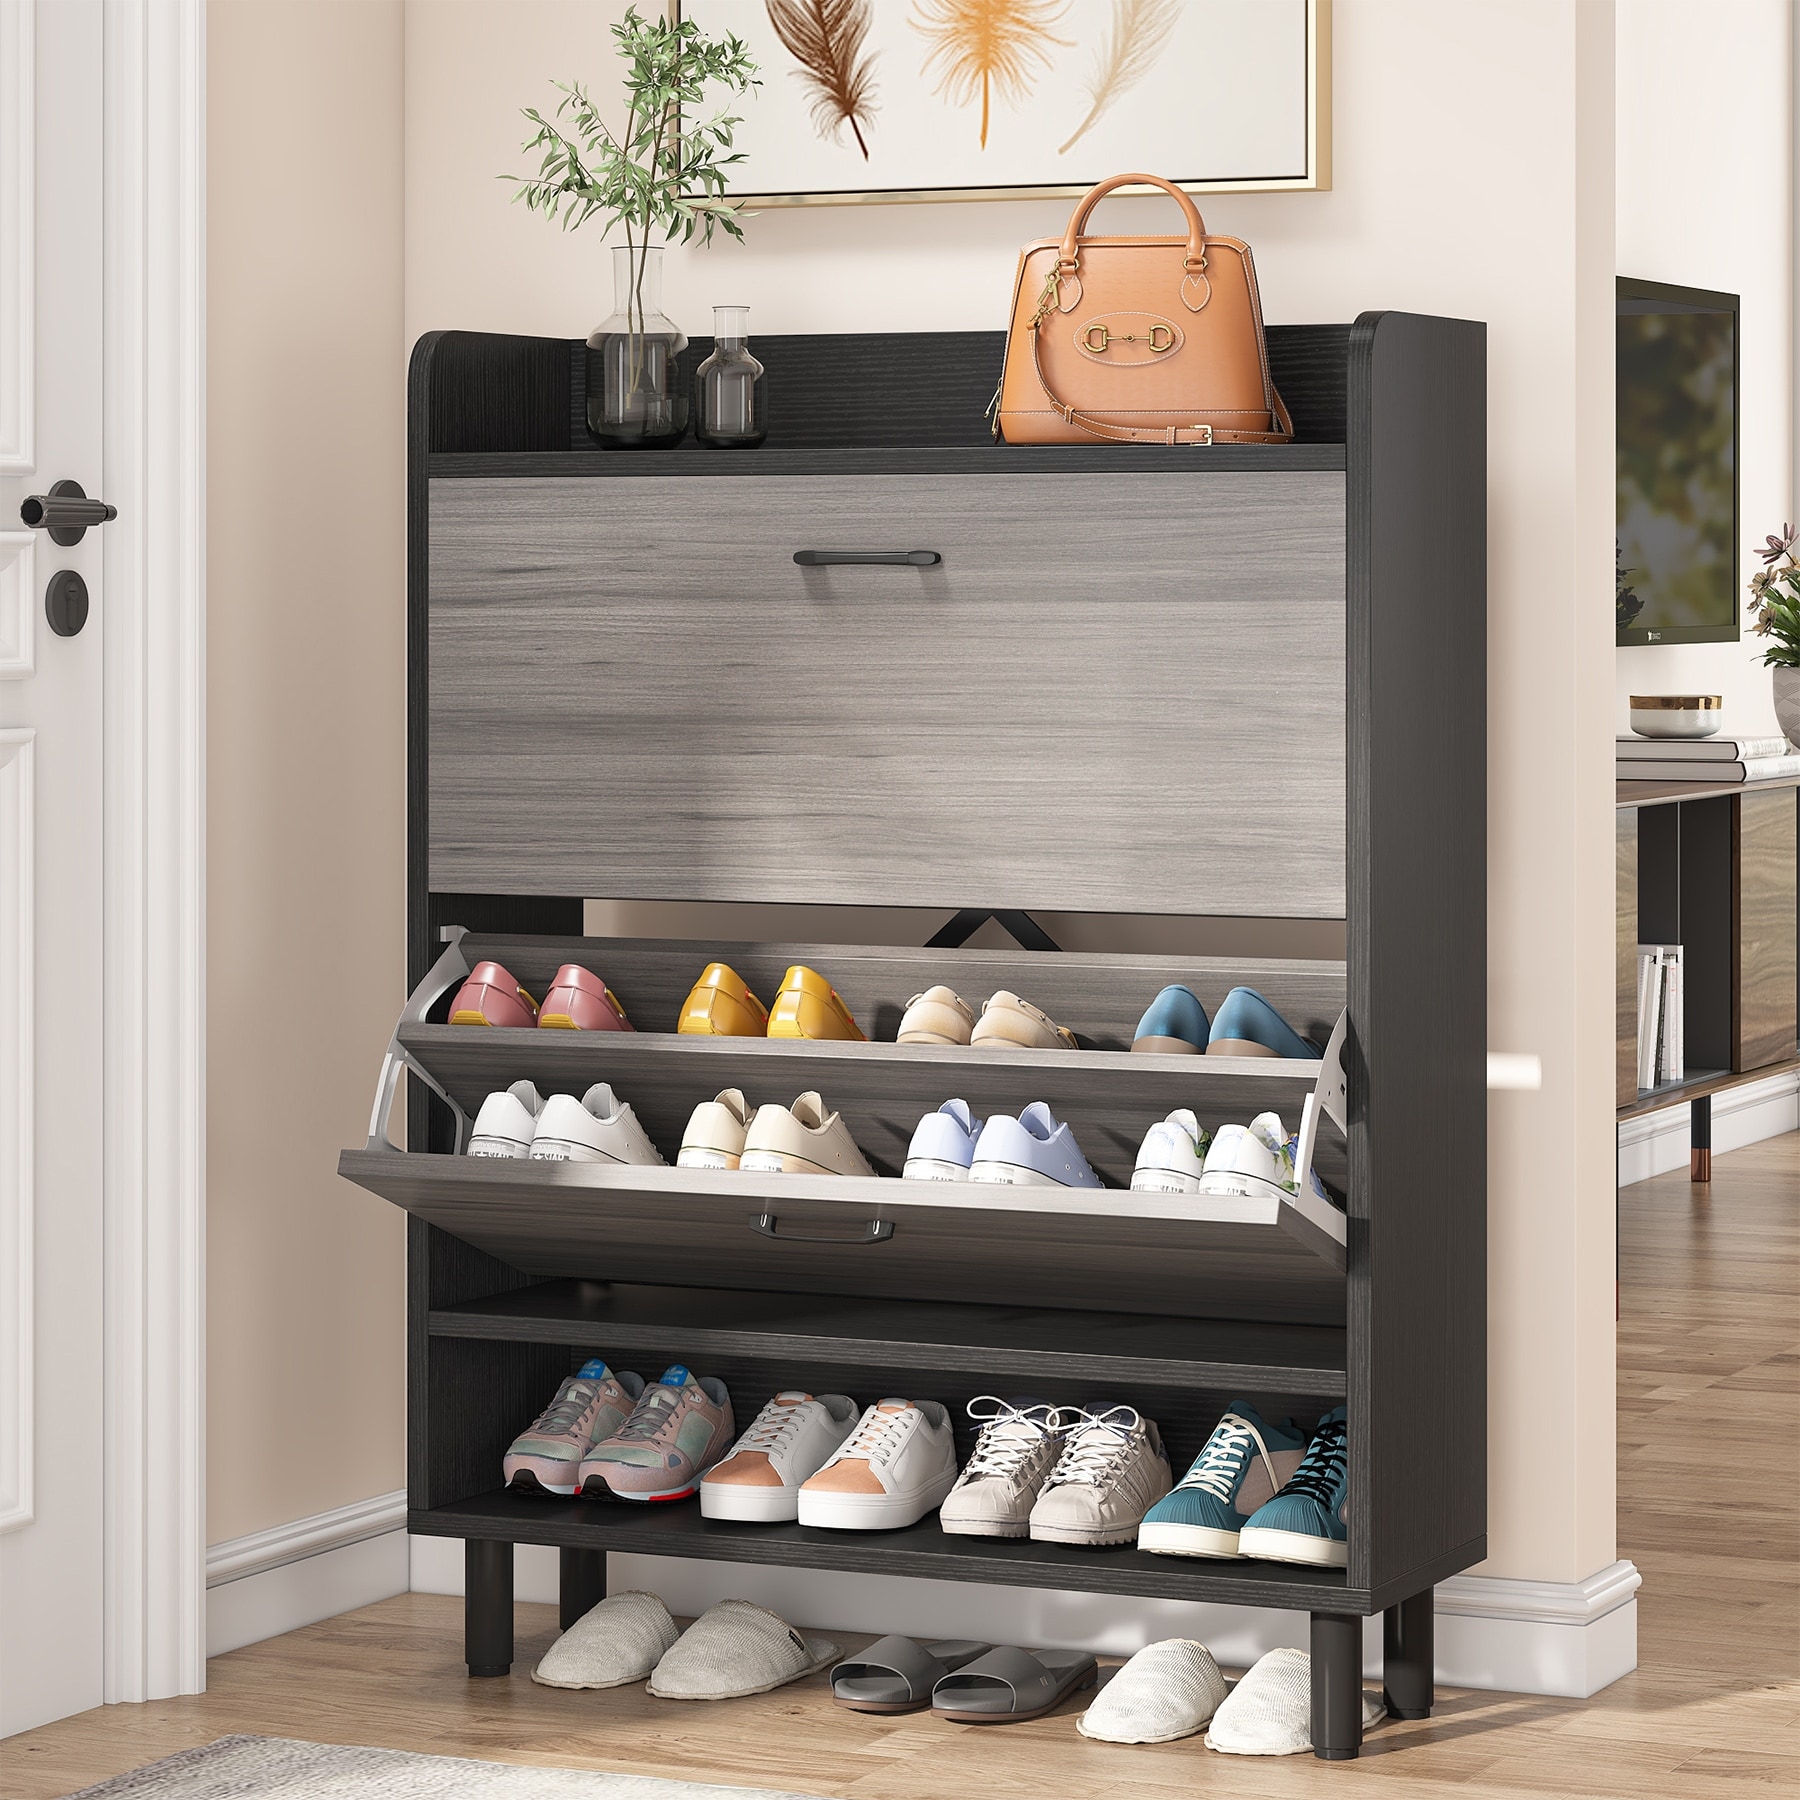 https://ak1.ostkcdn.com/images/products/is/images/direct/2e831565b3749cce682bc3c39555b45e9b2b50b6/Shoe-Cabinet%2C-Brown-Shoe-Storage-Organizer-with-2-Compartment.jpg